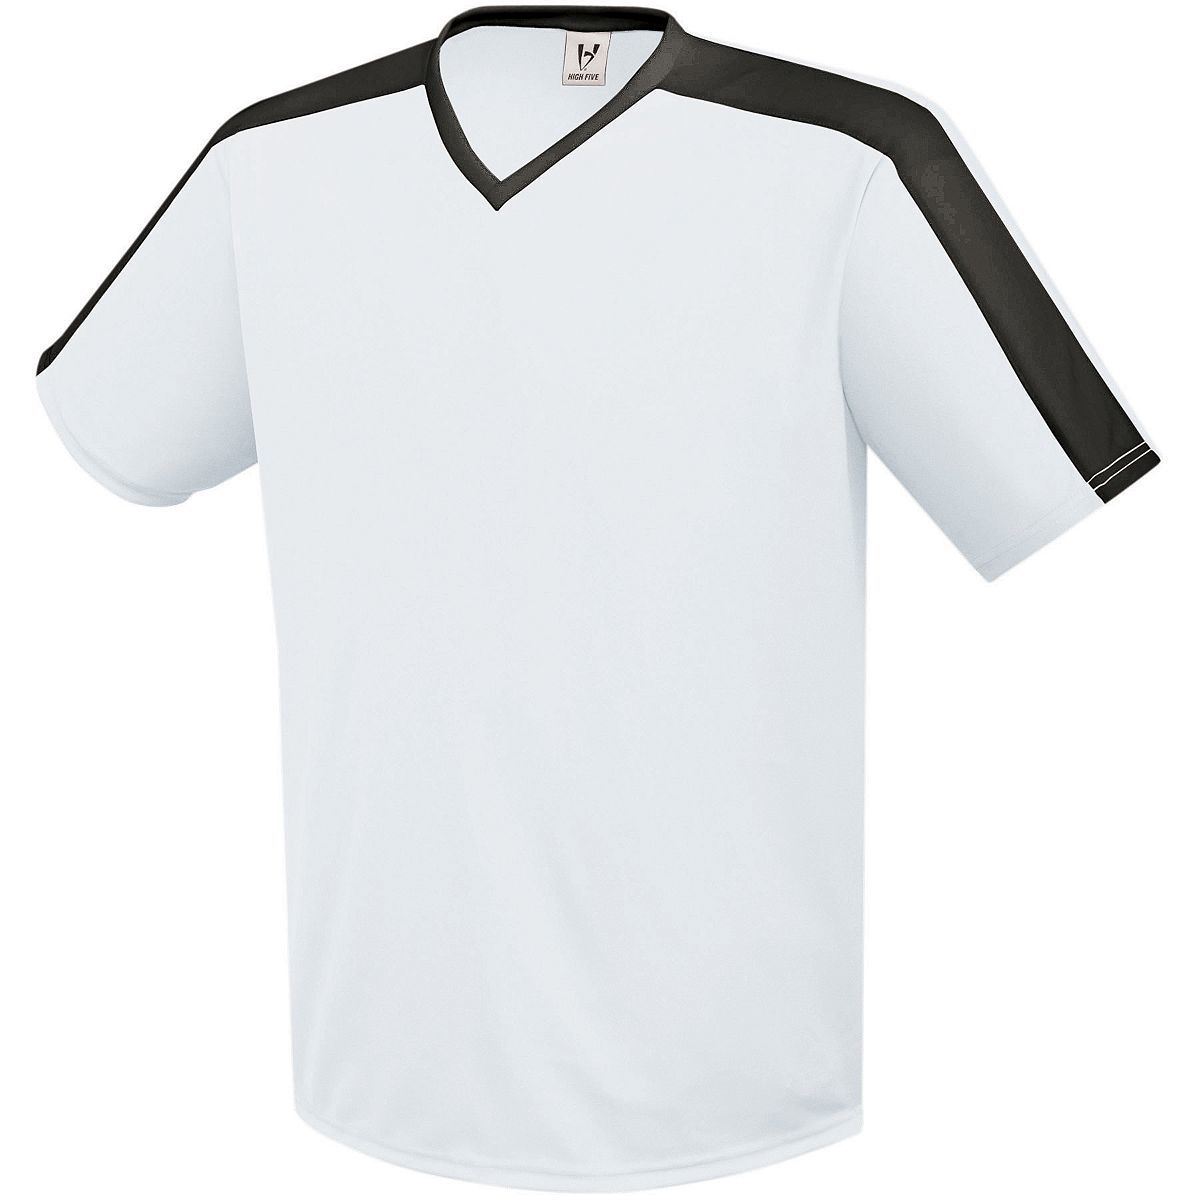 High Five 322731 - Youth Genesis Soccer Jersey